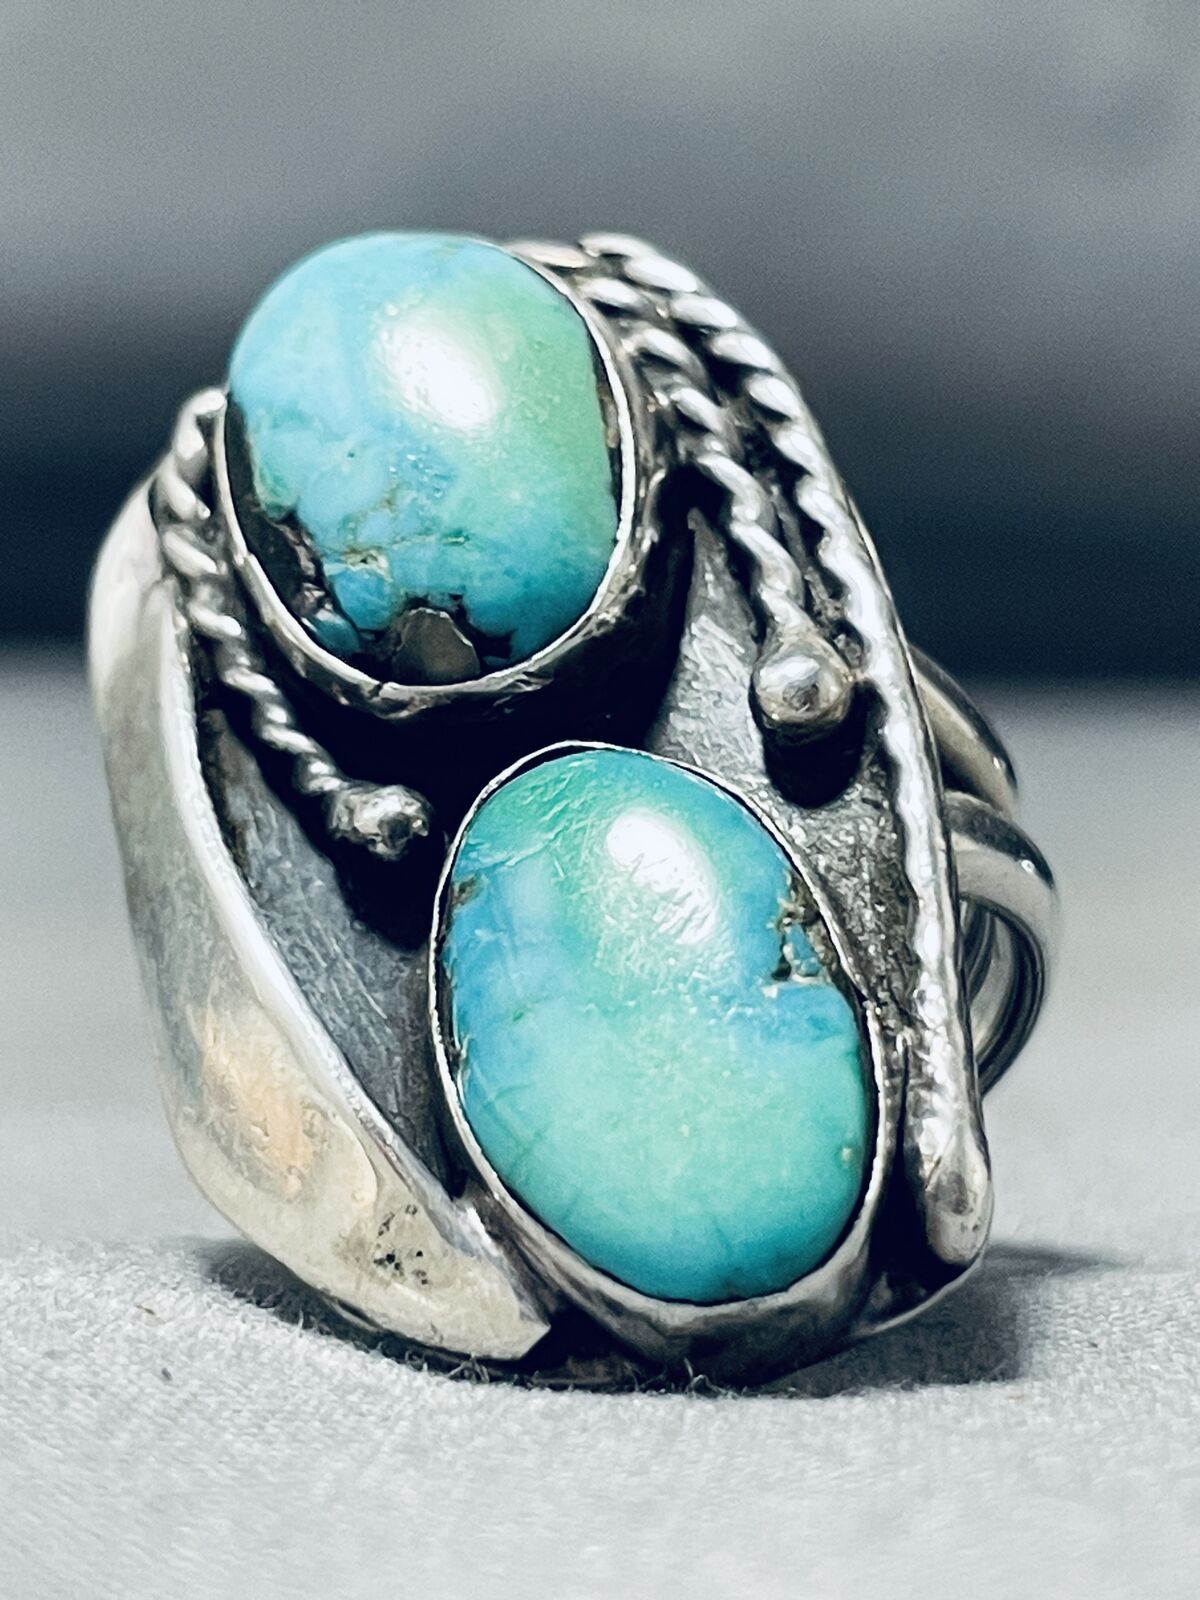 DOUBLE EAGLE BLUE TURQUOISE STERLING SILVER RING OLD